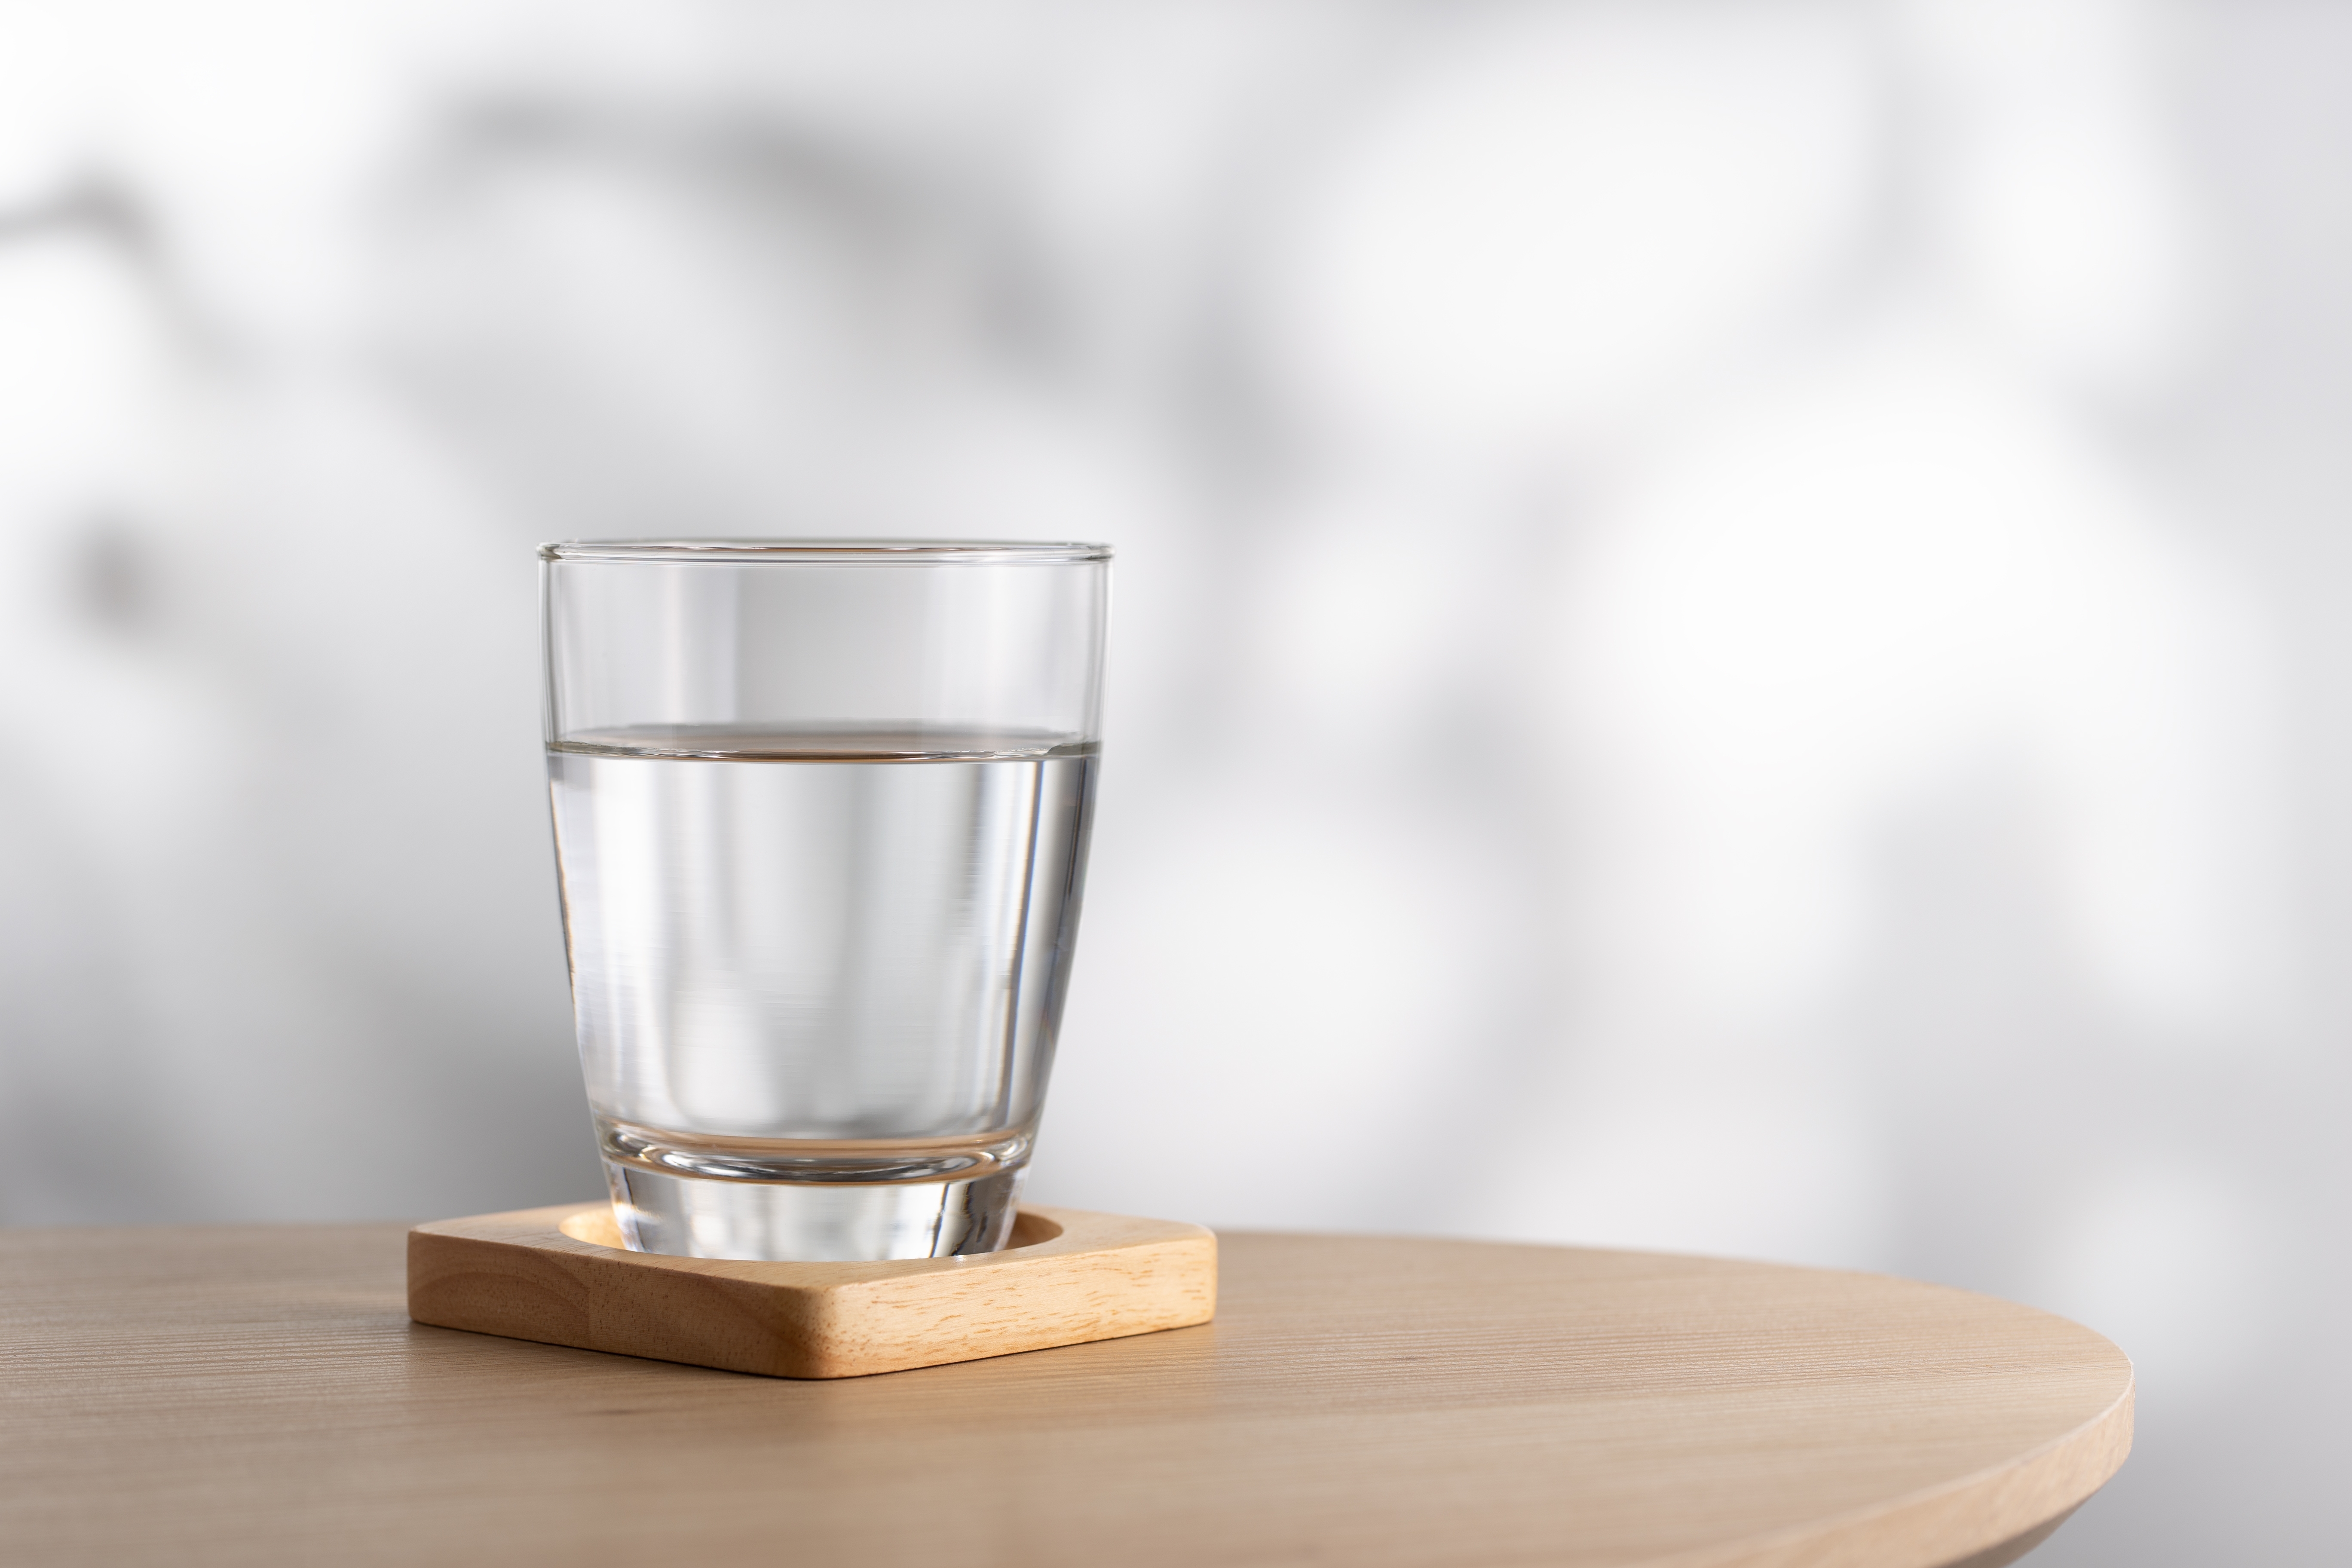 A glass of water on a wooden table | Source: Shutterstock